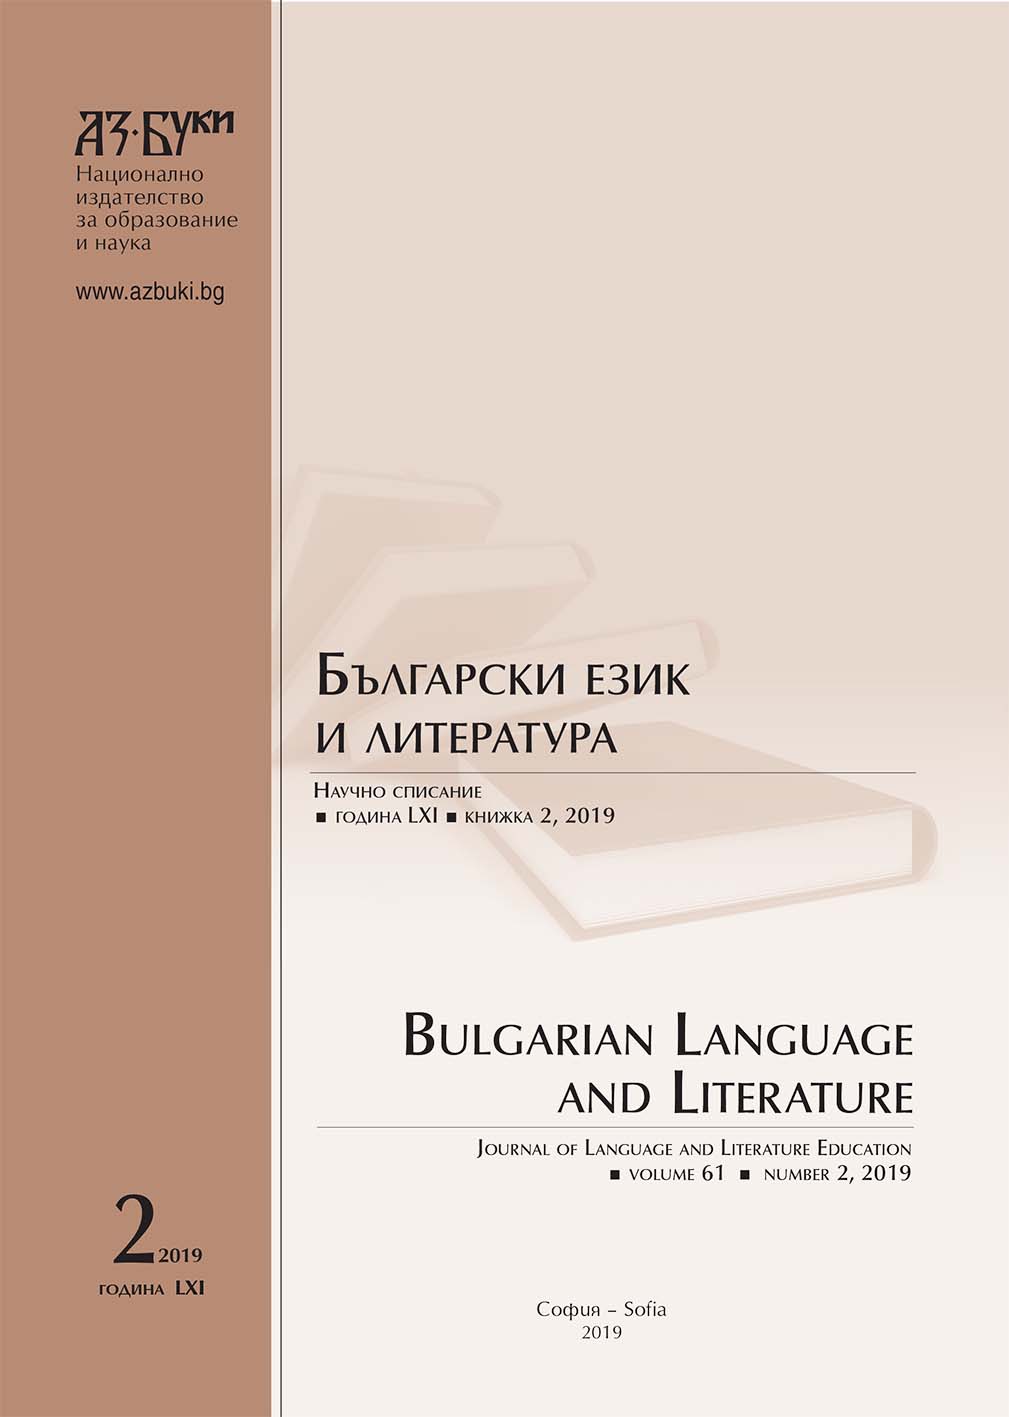 The Mother Dialect – Known and Unknown. Joint Project by Young Researchers and the School Institute of the Bulgarian Academy of Sciences Cover Image